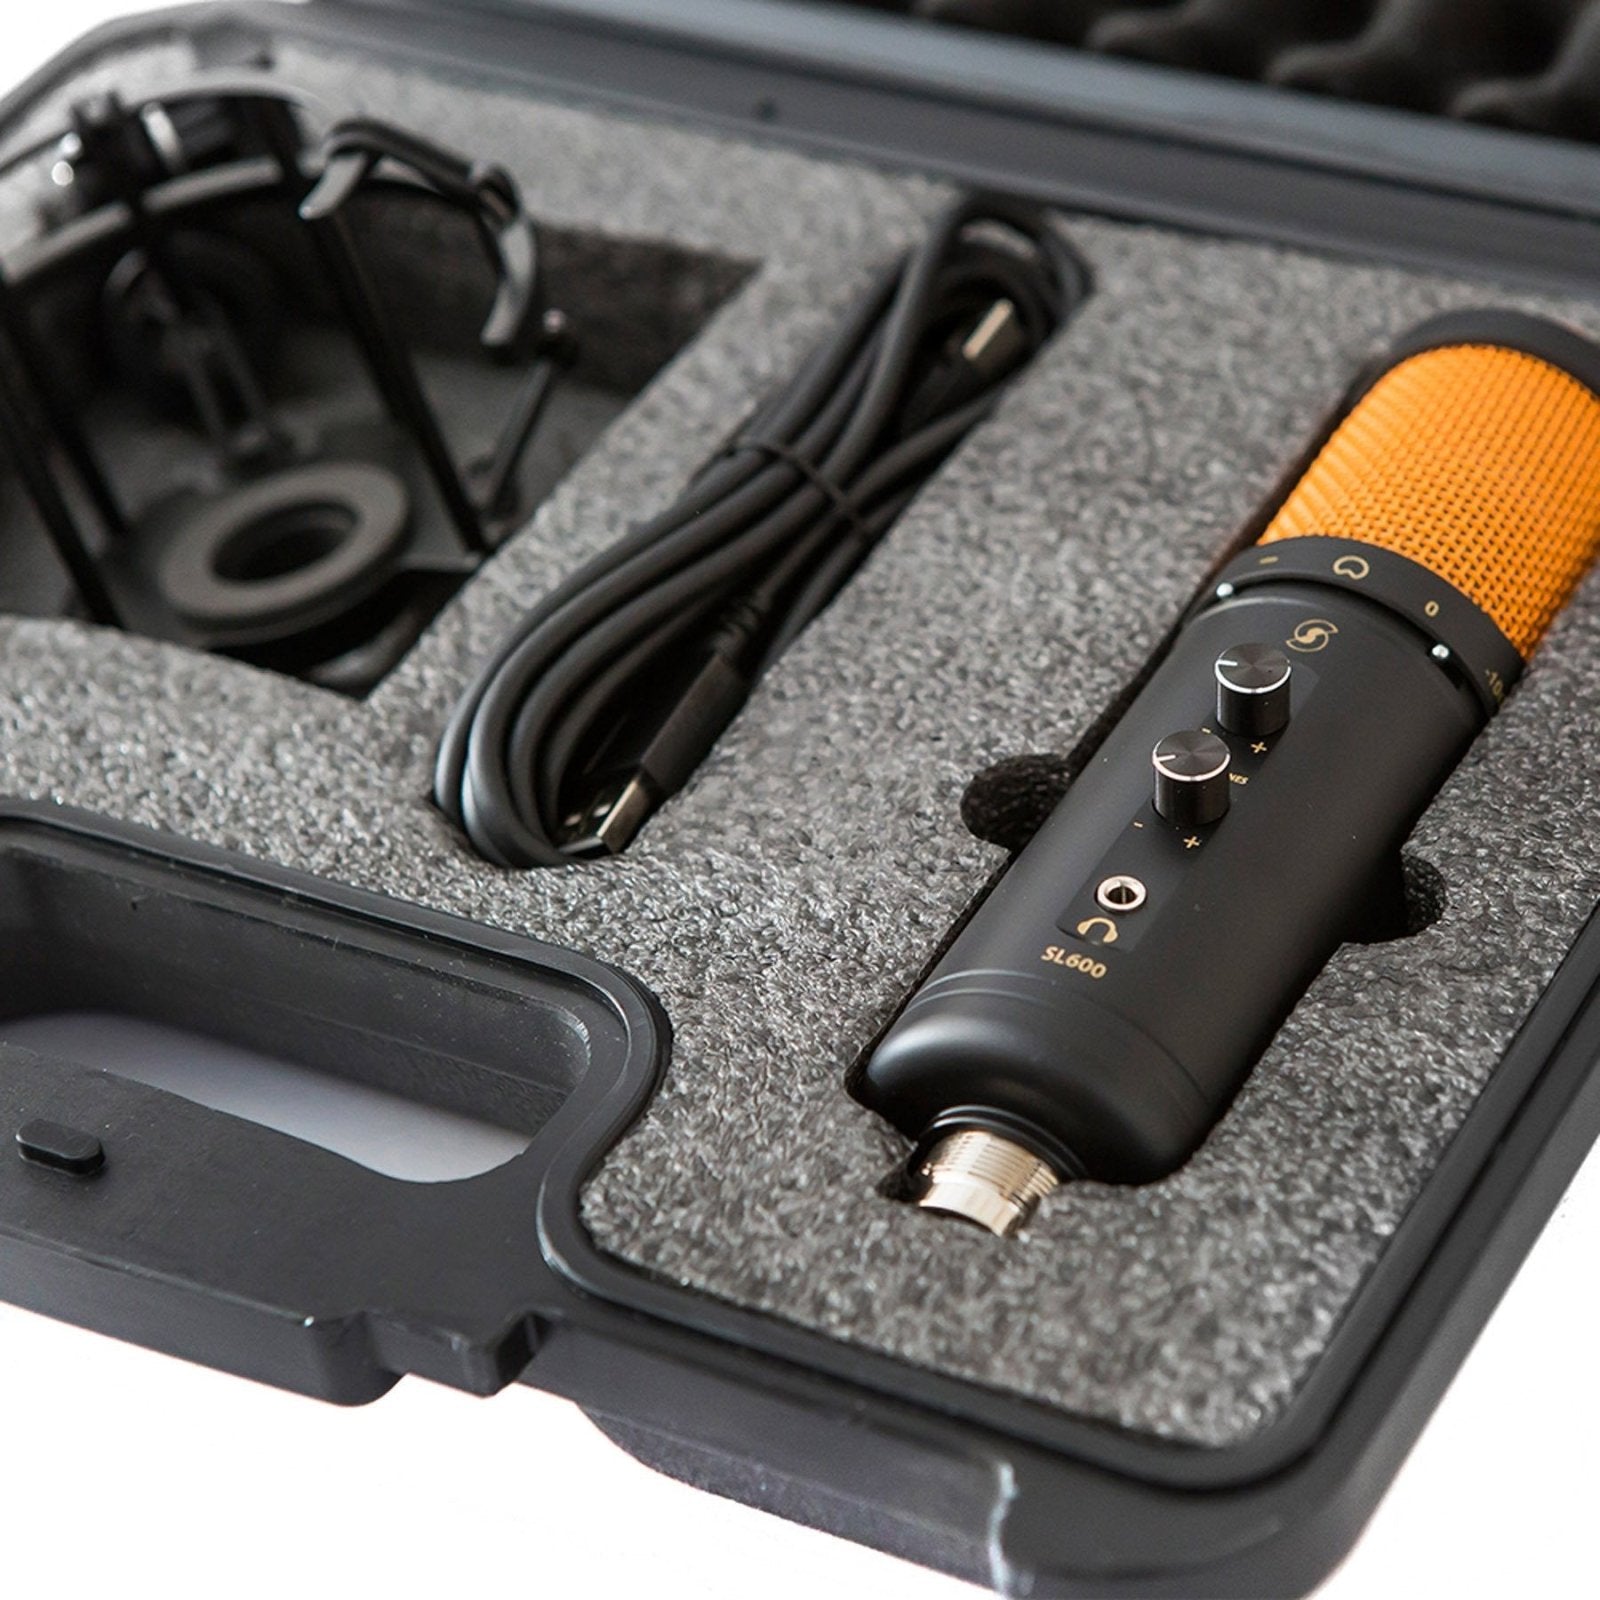 SL600 Condenser USB Microphone with Live Monitoring